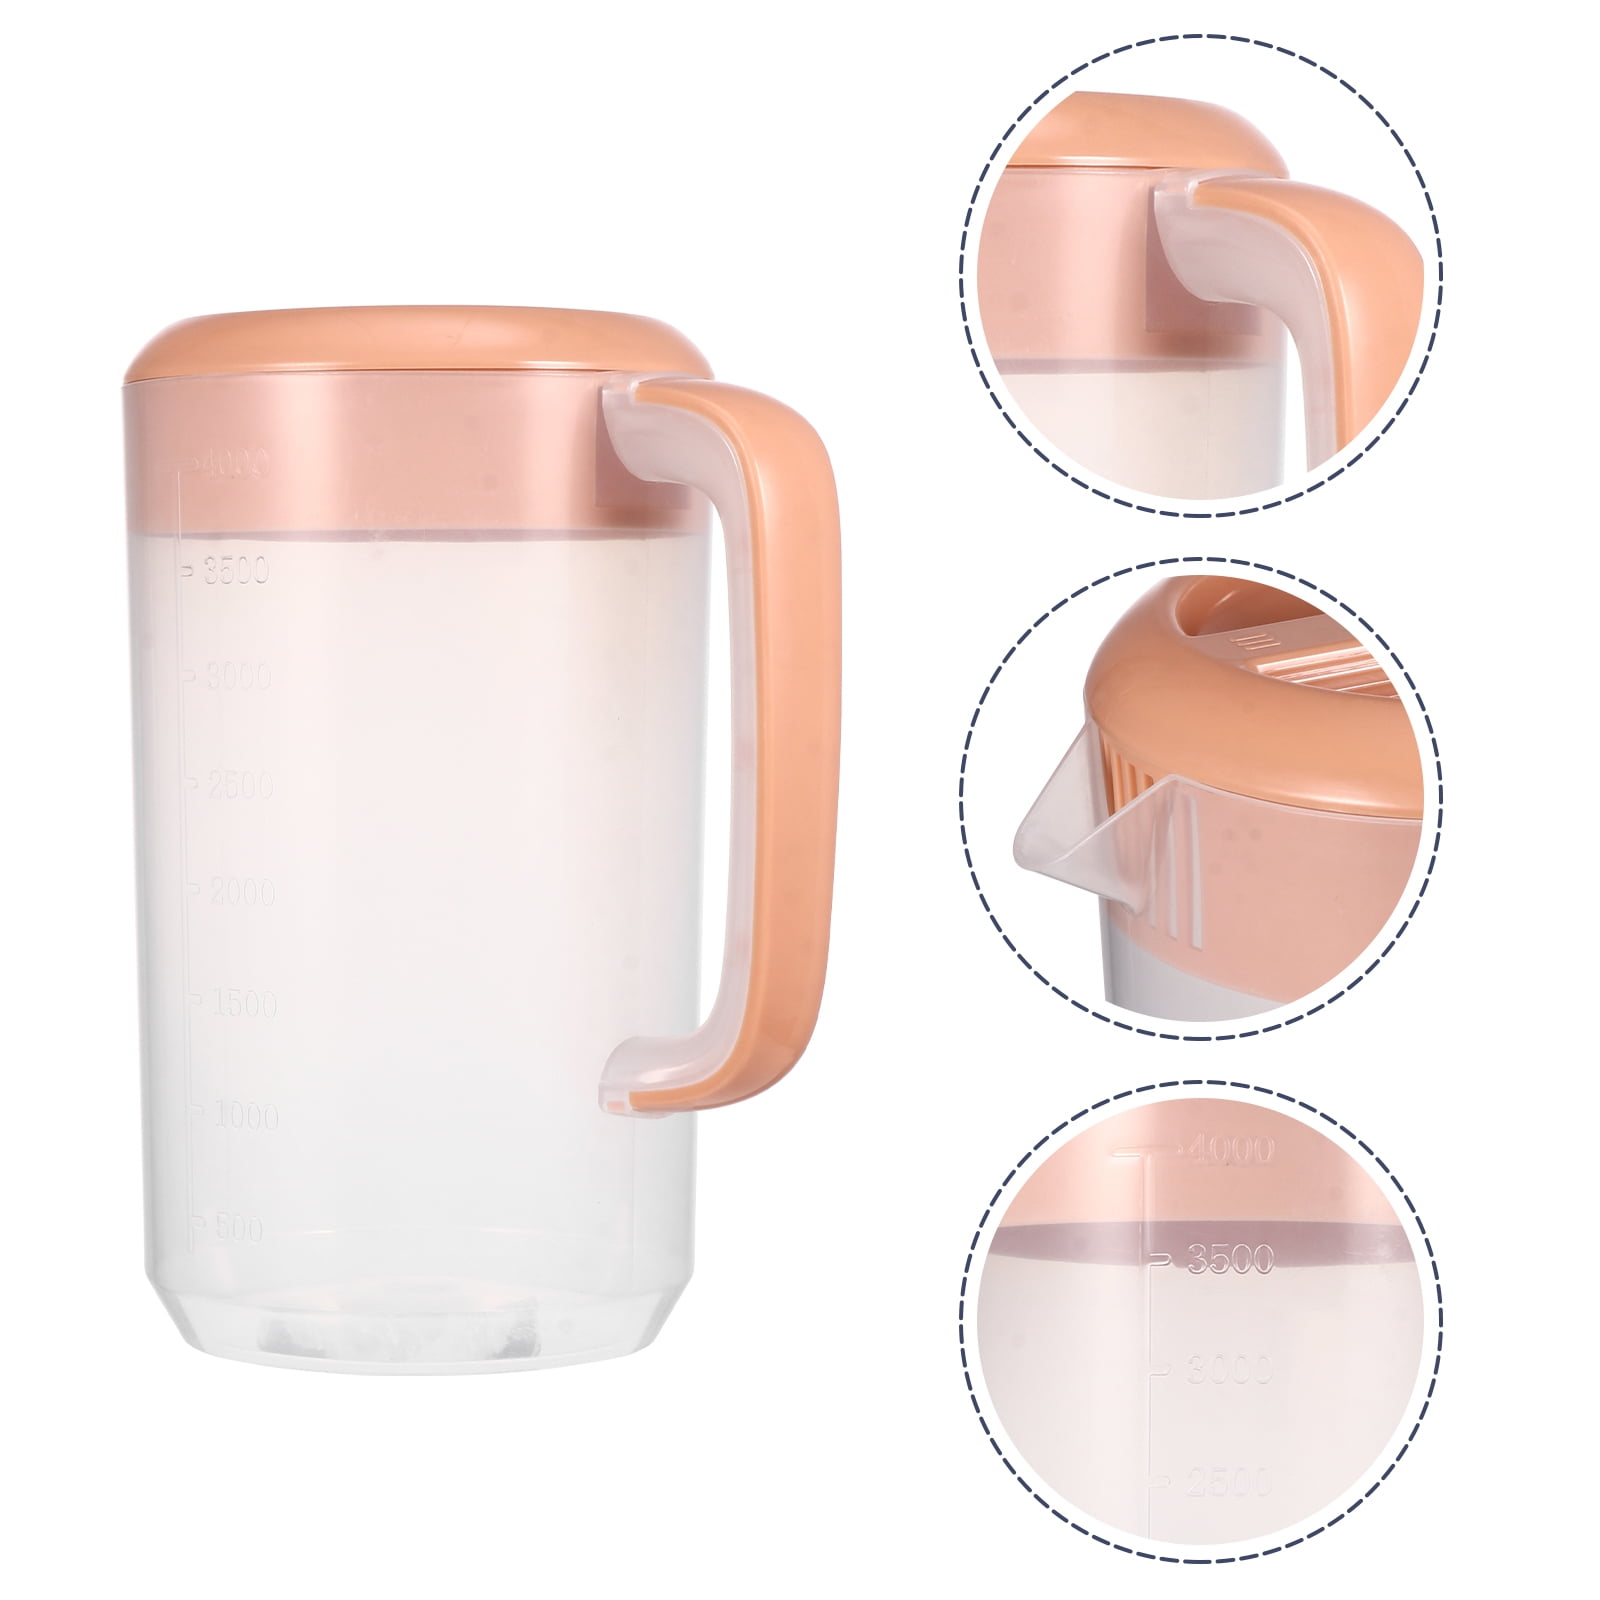 Acrylic Pitcher Water Pitchers Beverage Lid Juice Tea Lemonade Acrylic  Clear Iced Cold Kettle Jug Night